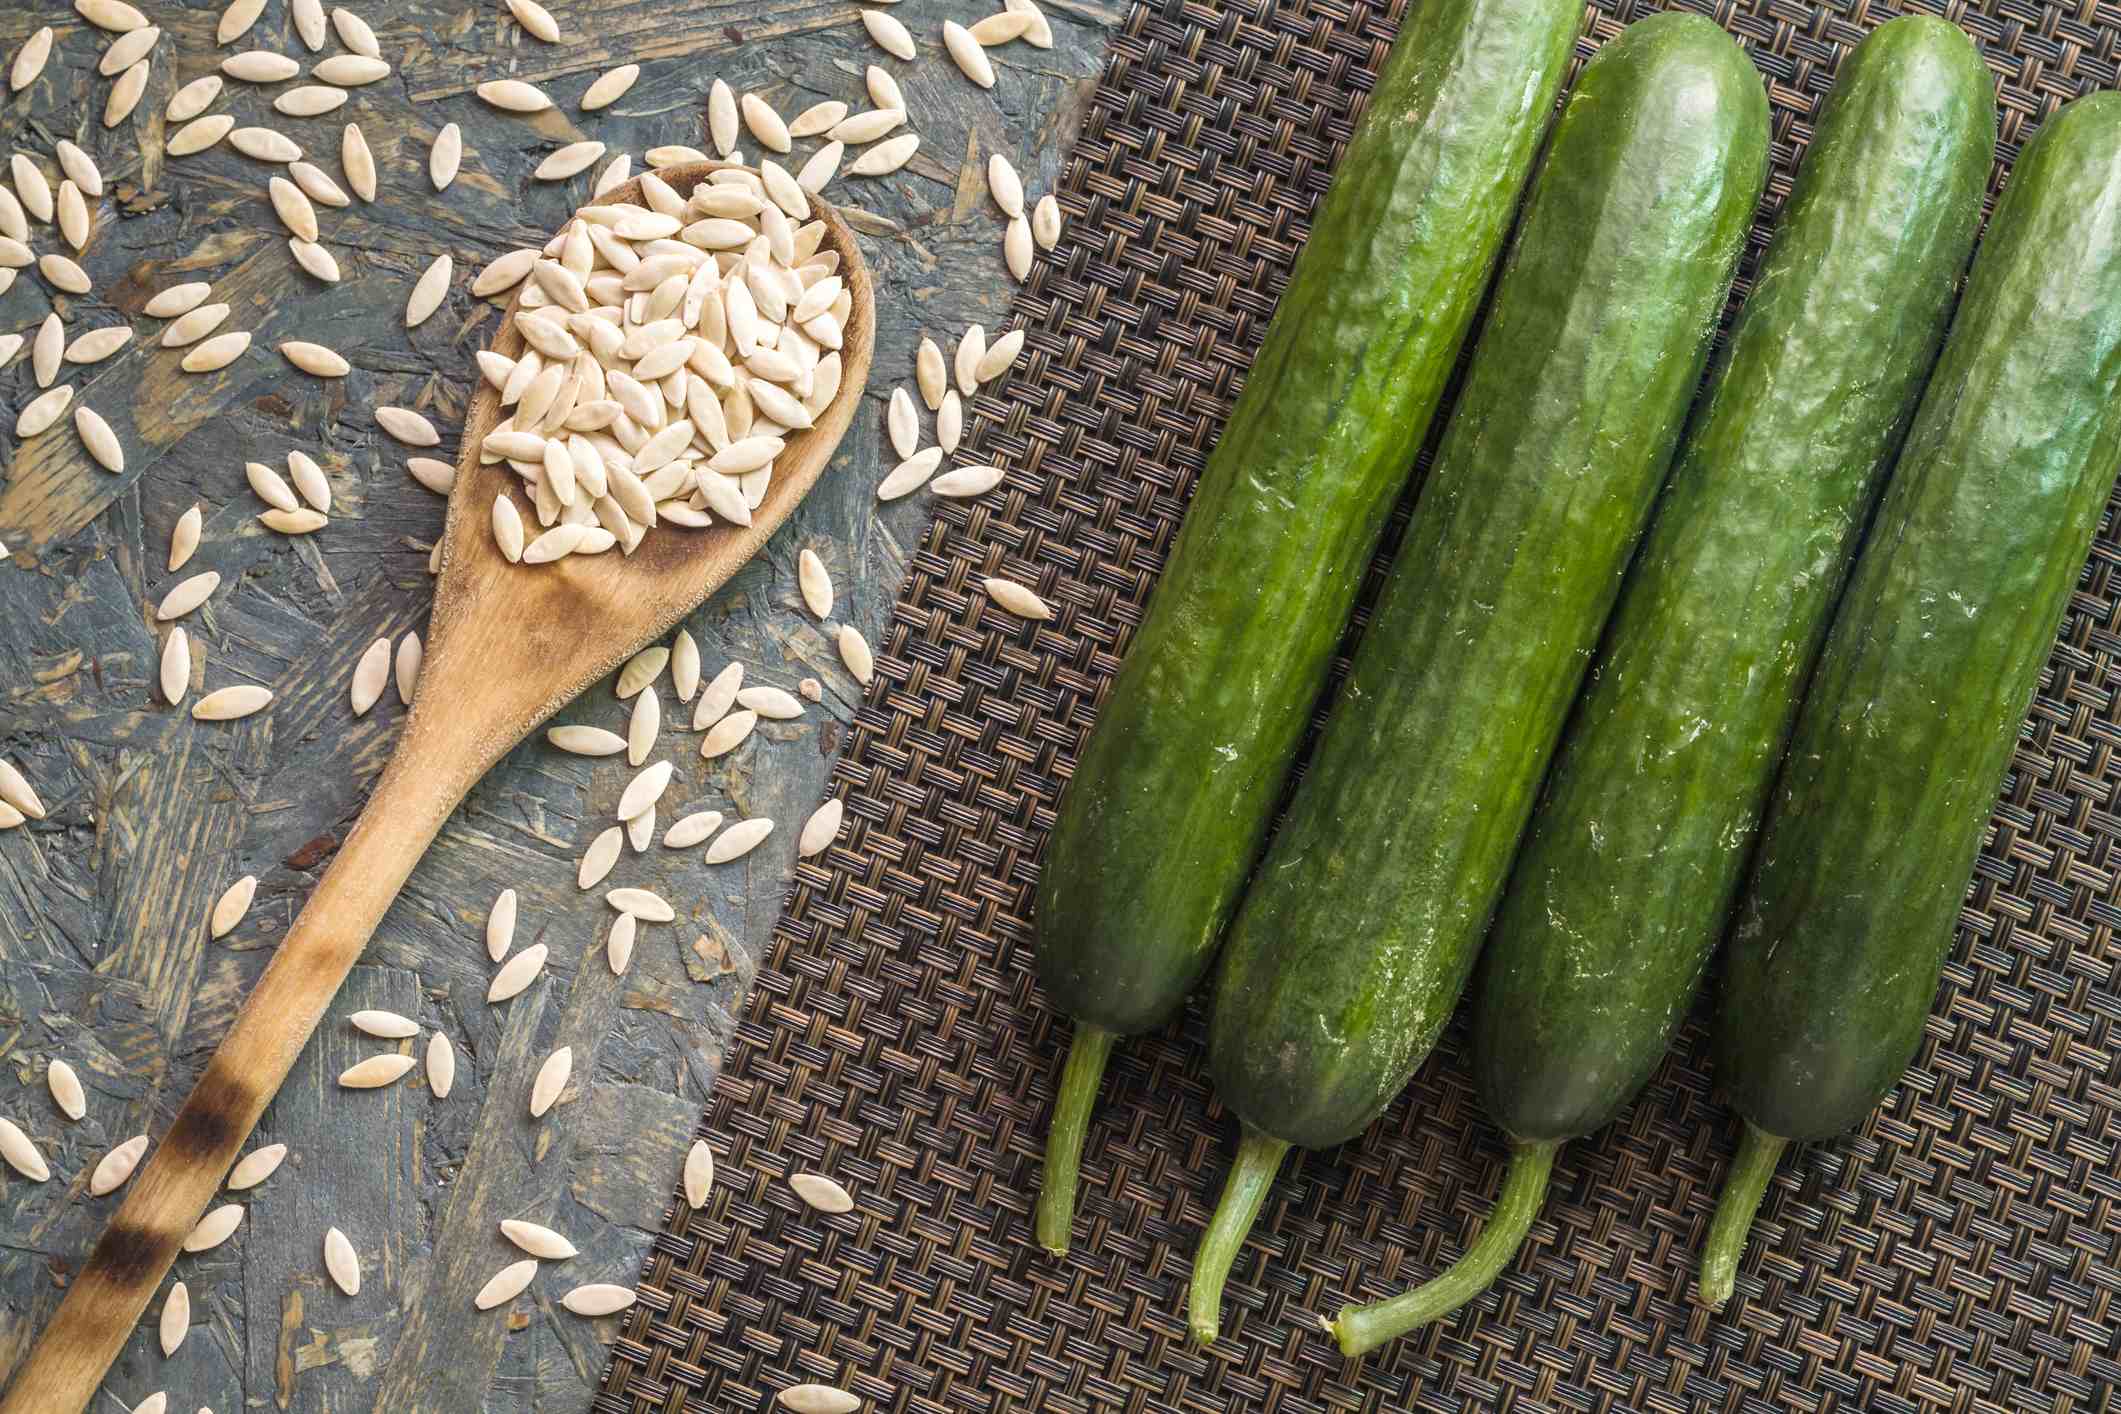 How To Get Seeds From Cucumber For Planting